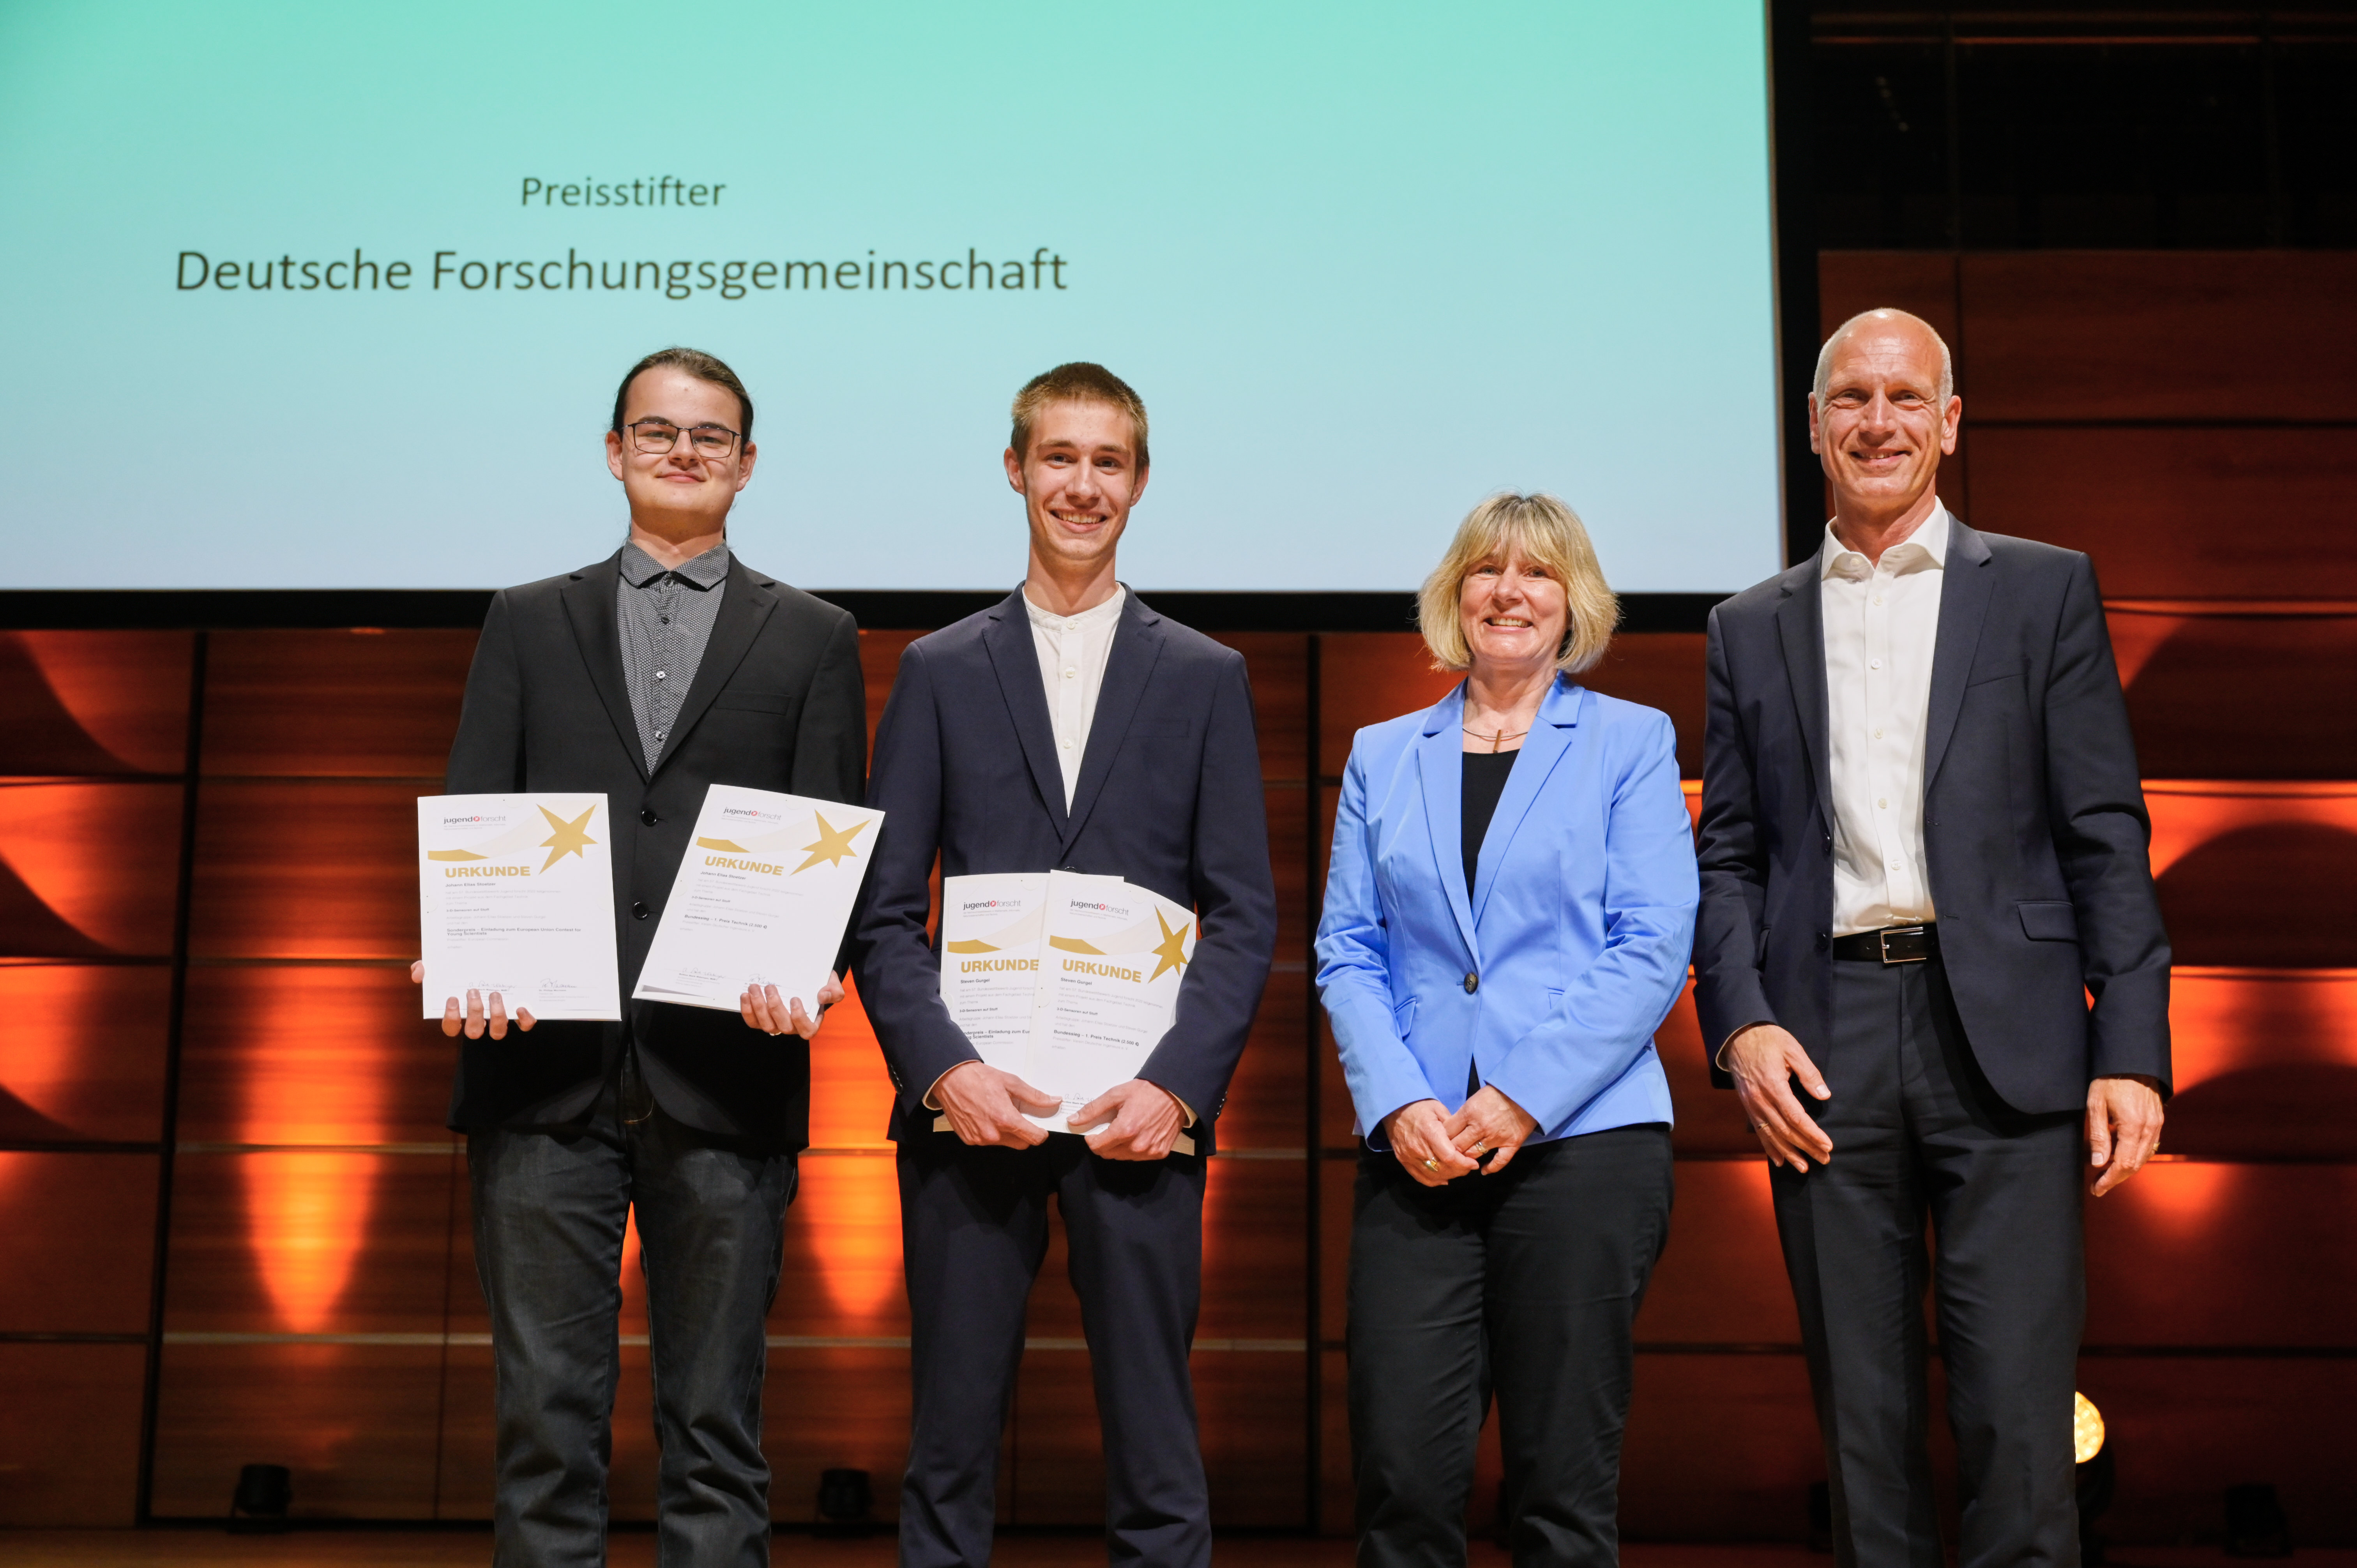 The national prizewinners in the field of technology (from left to right): Johann Elias Stoetzer and Steven Gurgel. The Europa-Preis was handed over by Dr. Heide Ahrens, and they received the 1st prize from Dipl.-Ing. Sven Warnck, Chairman of the VDI